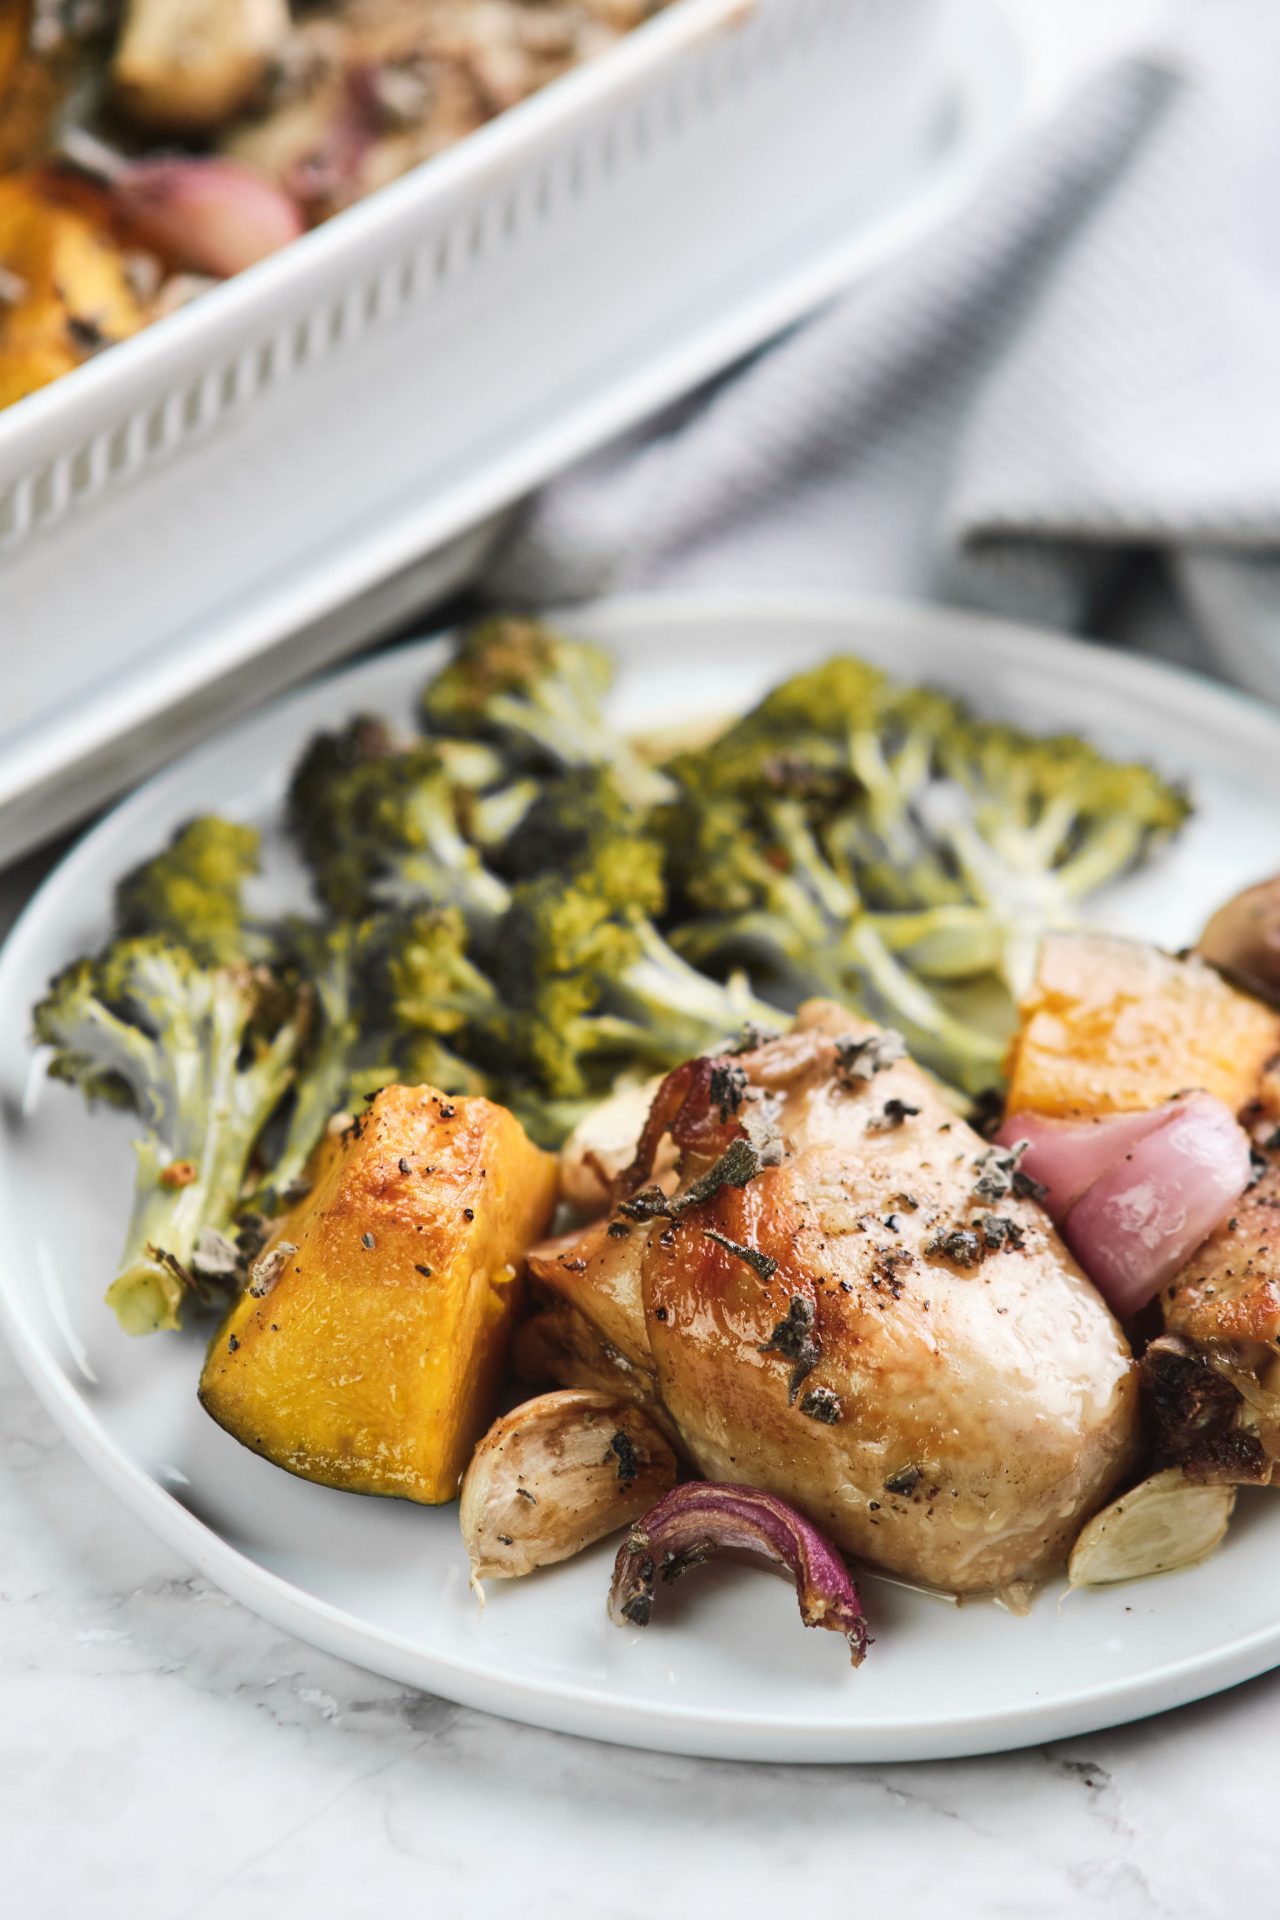 Image of a dinner plate with roast chicken, pumpkin, broccoli and herbs